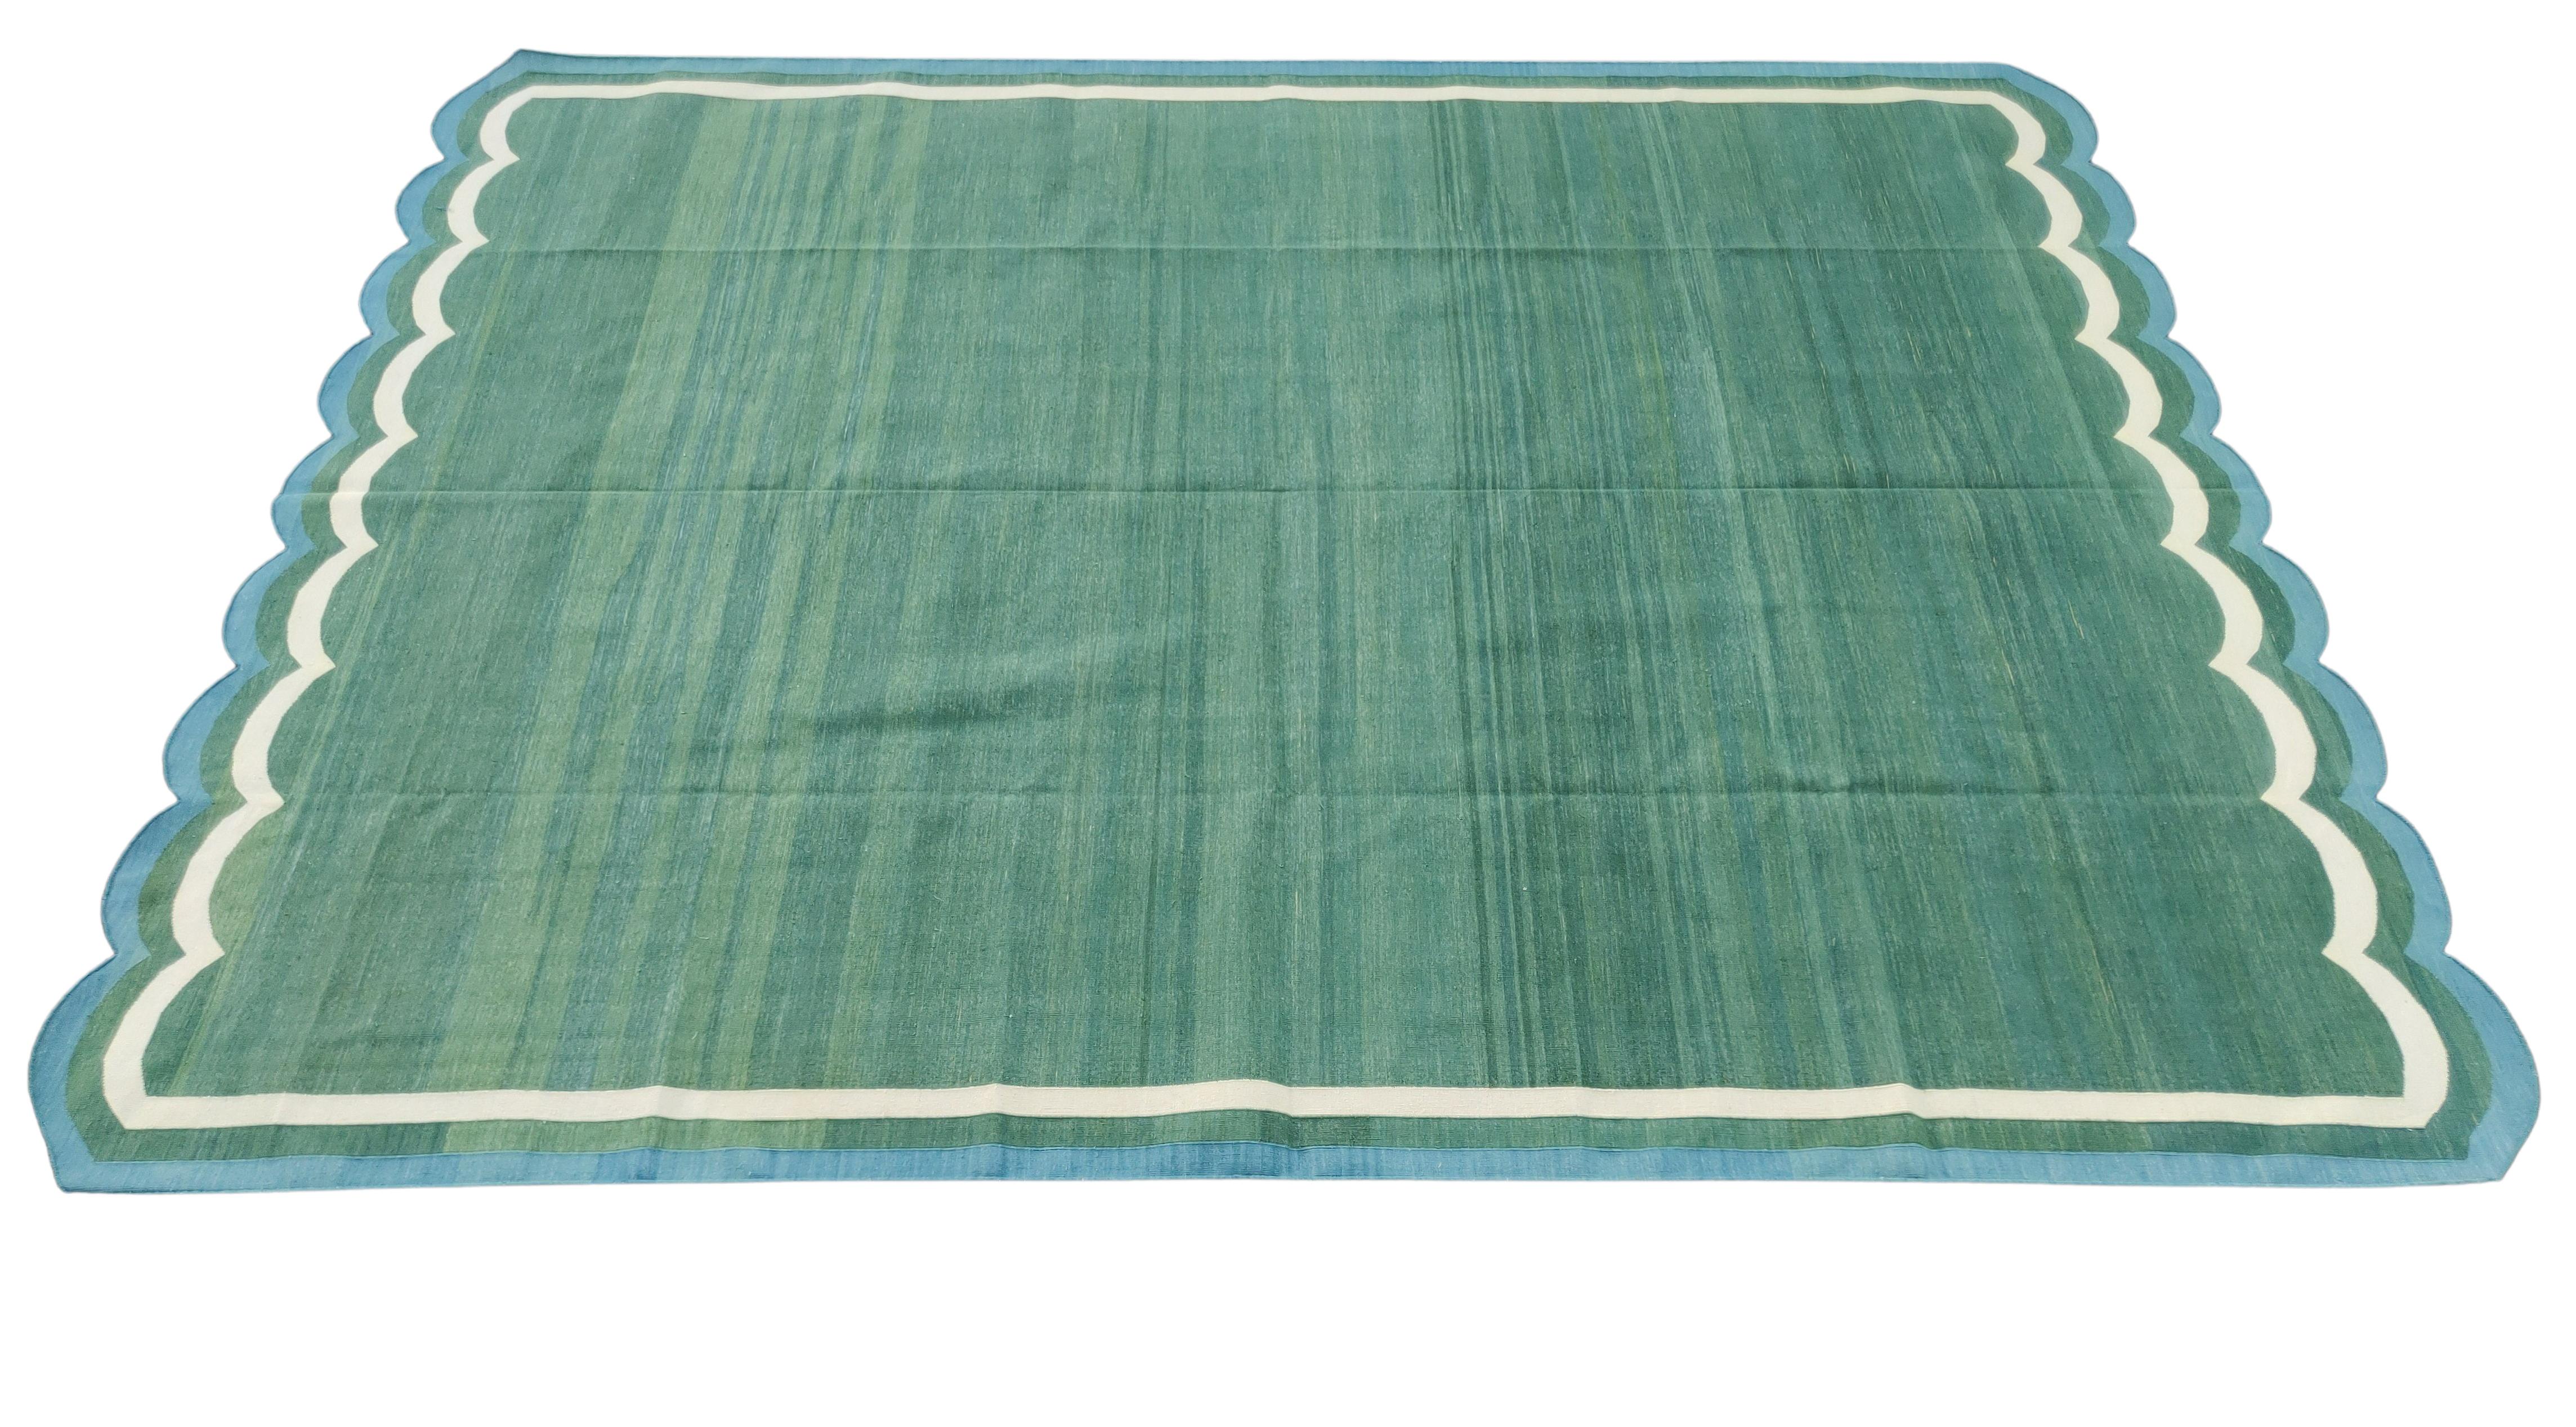 Handmade Cotton Area Flat Weave Rug, 9x12 Green And Blue Scalloped Kilim Dhurrie For Sale 3